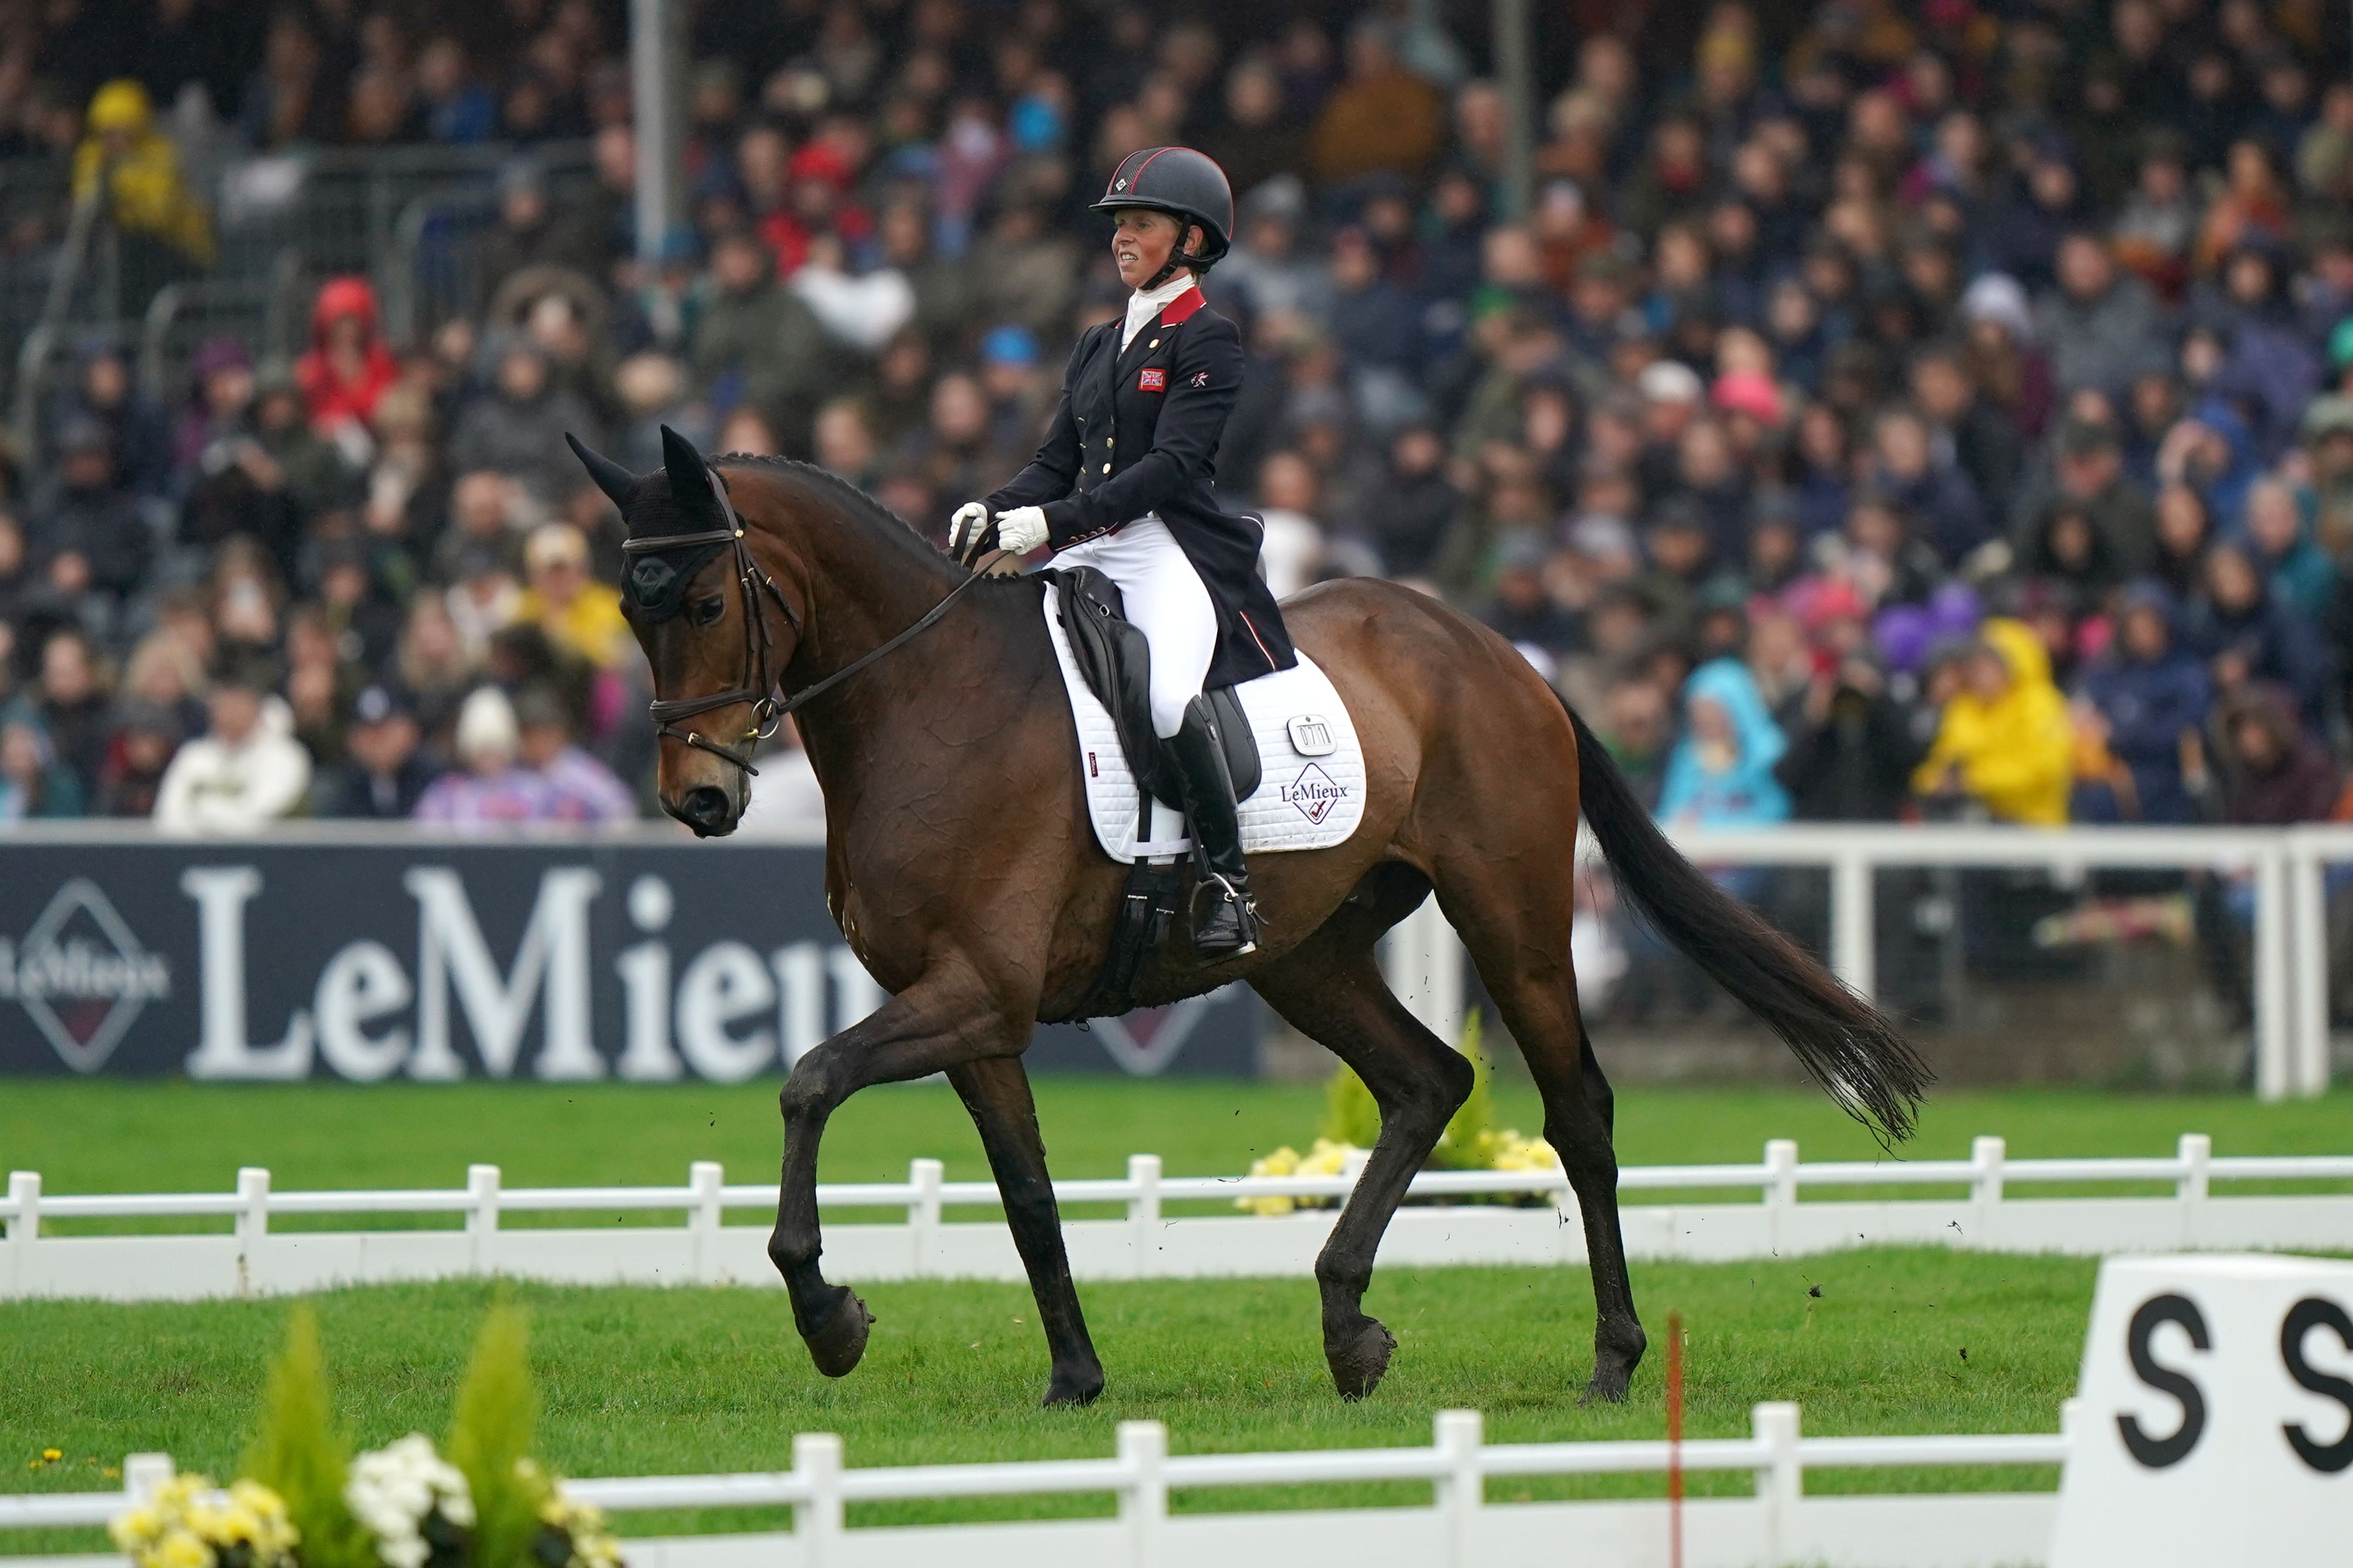 badminton horse trials live streaming free